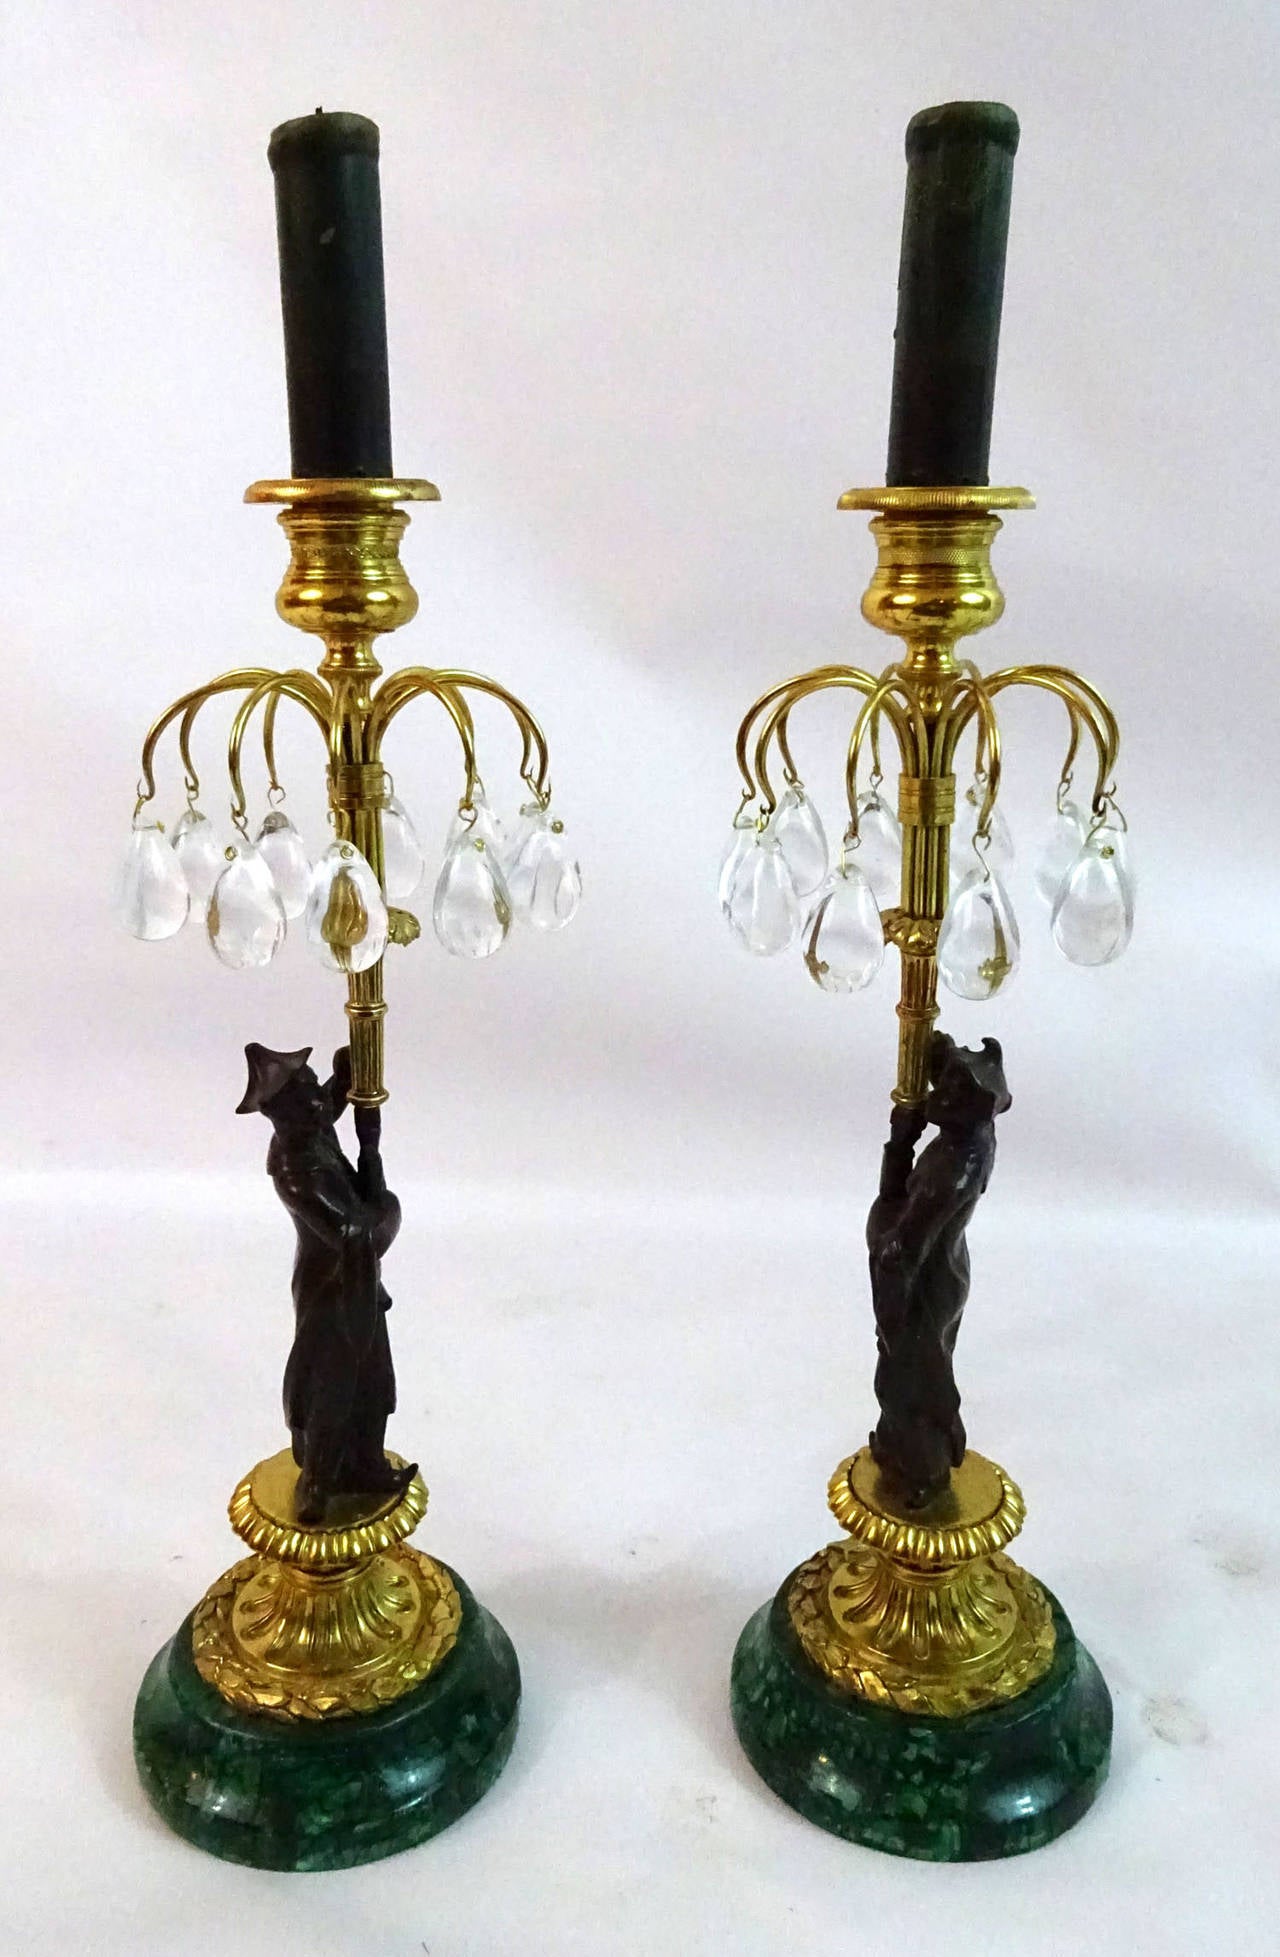 Pair of Late 19th c. French Bronze Ormolu and Malachite Candlesticks 5